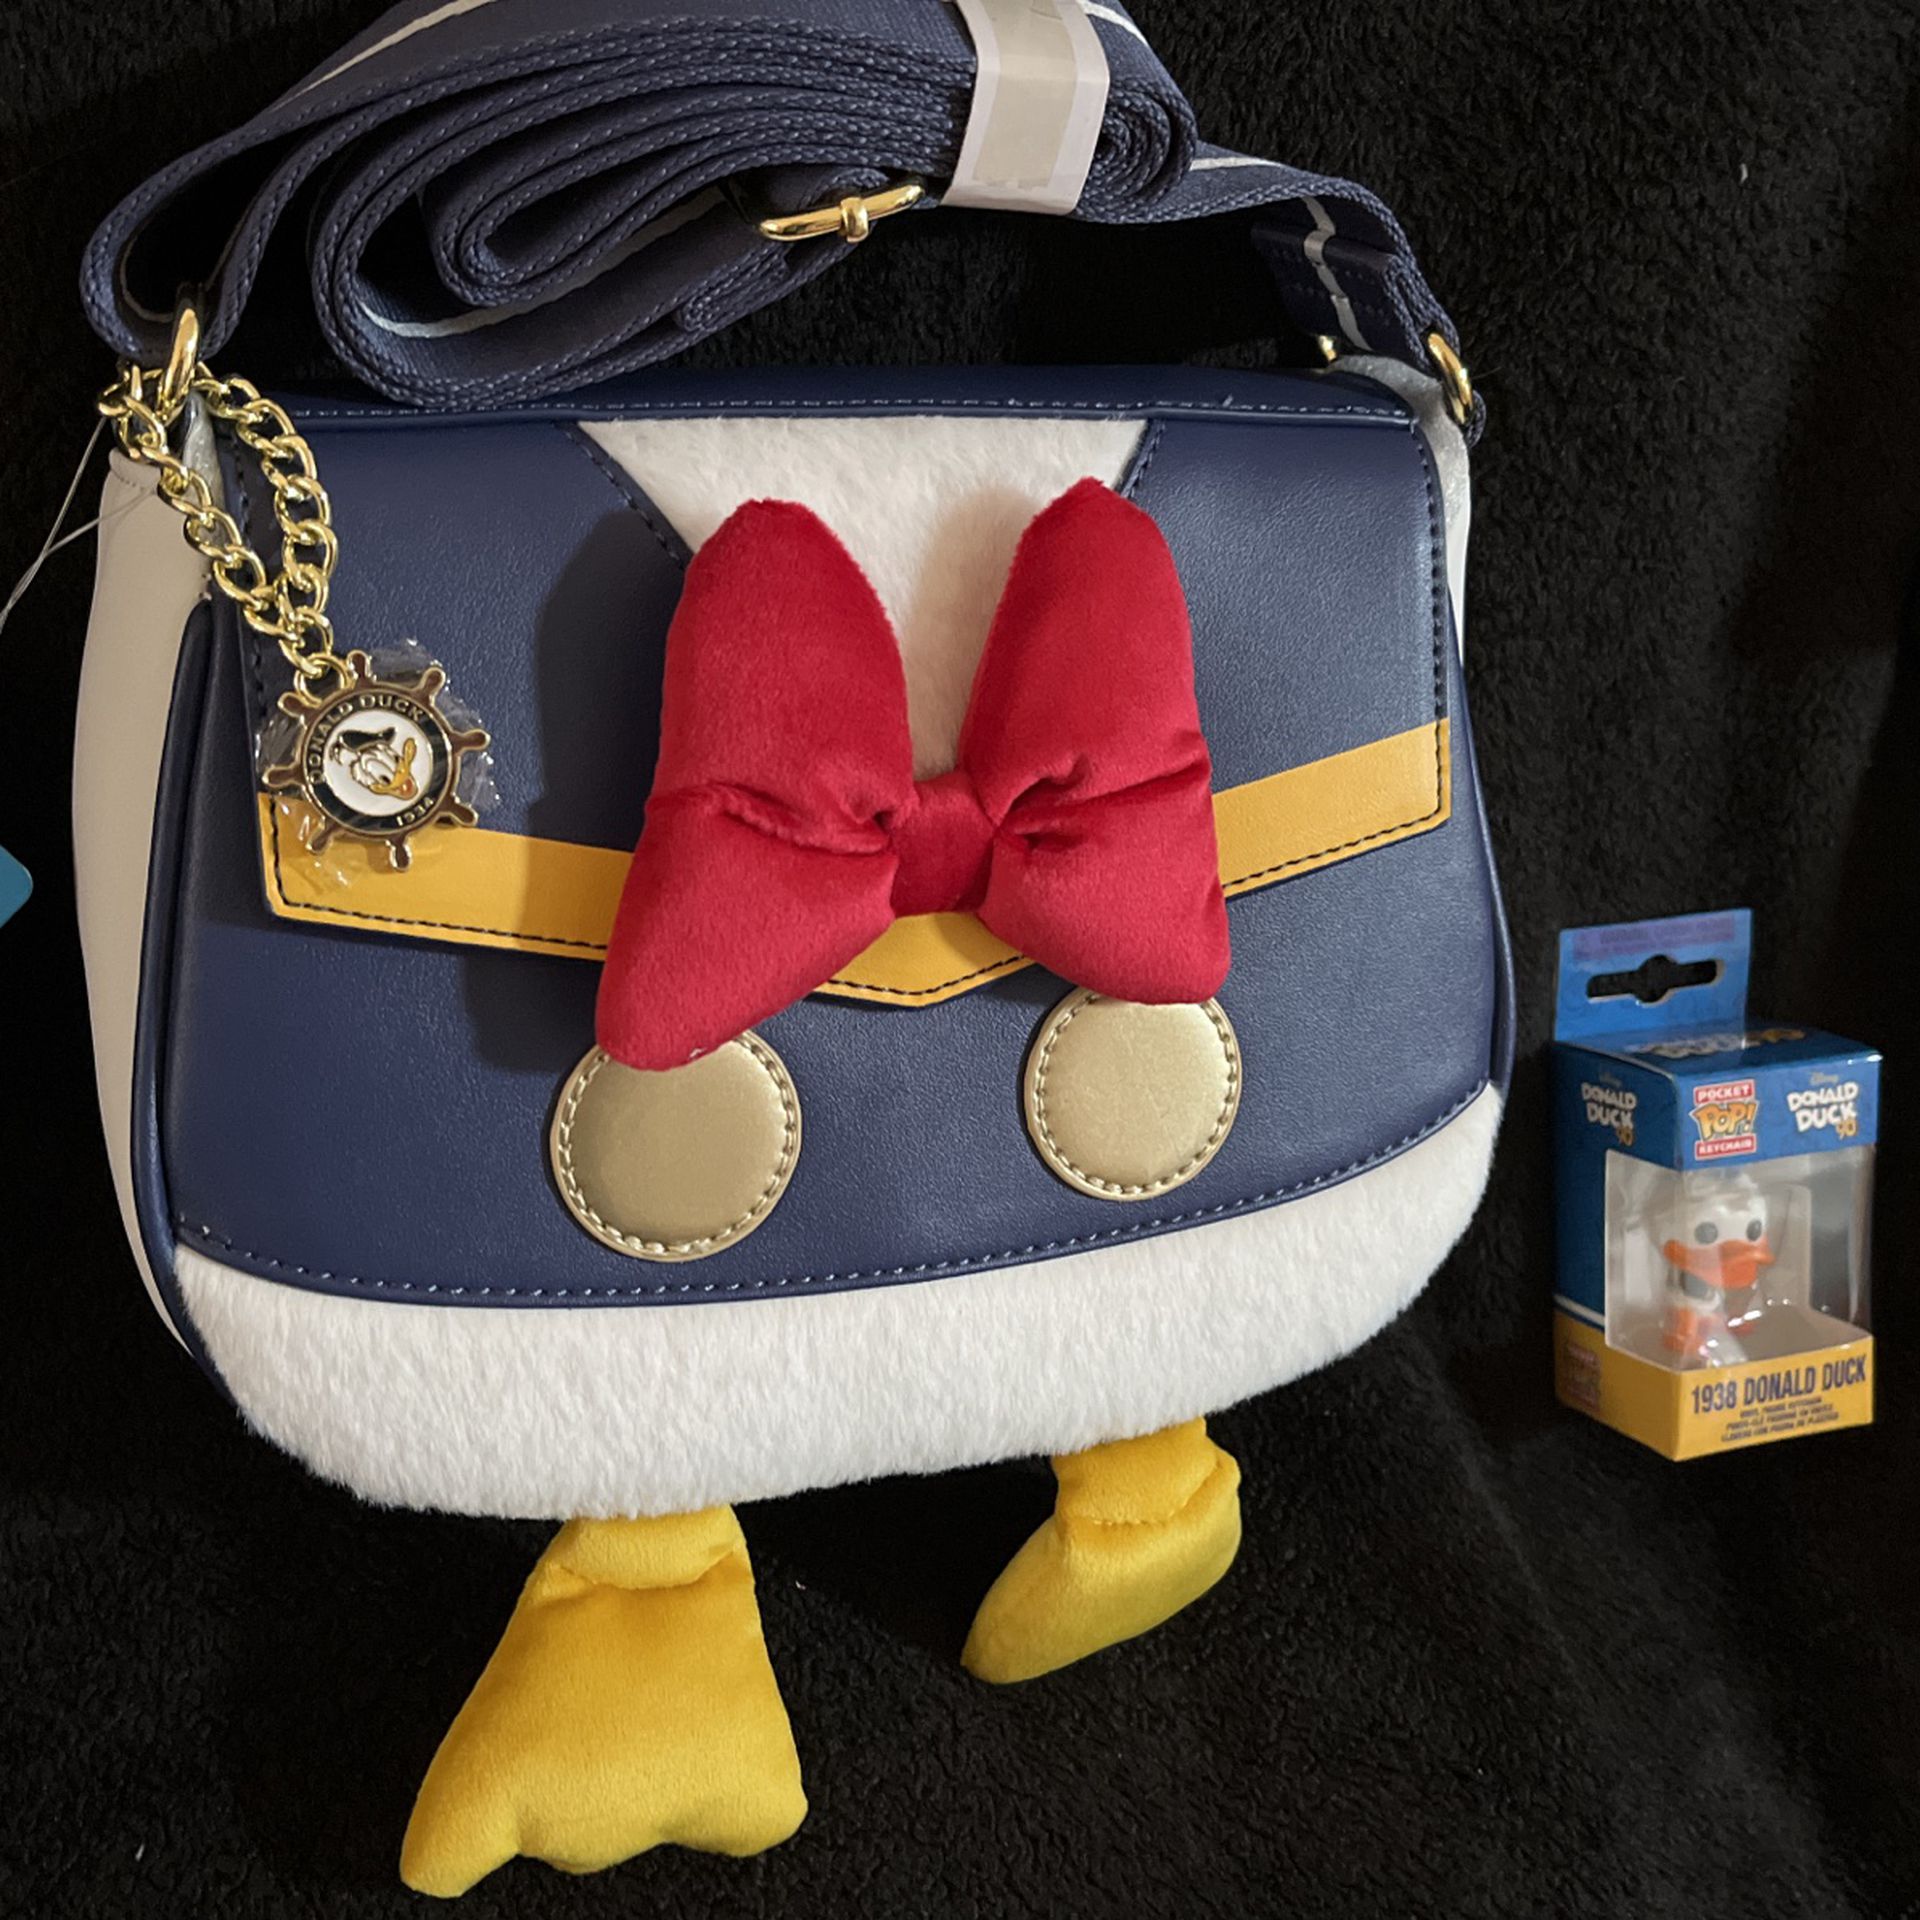 Disney DONALD DUCK cross body Purse (Price PIs Firm) Keychain Sold Separately (MORE DISNEY CROSS PURSES 👛 IN PROFILE 😎